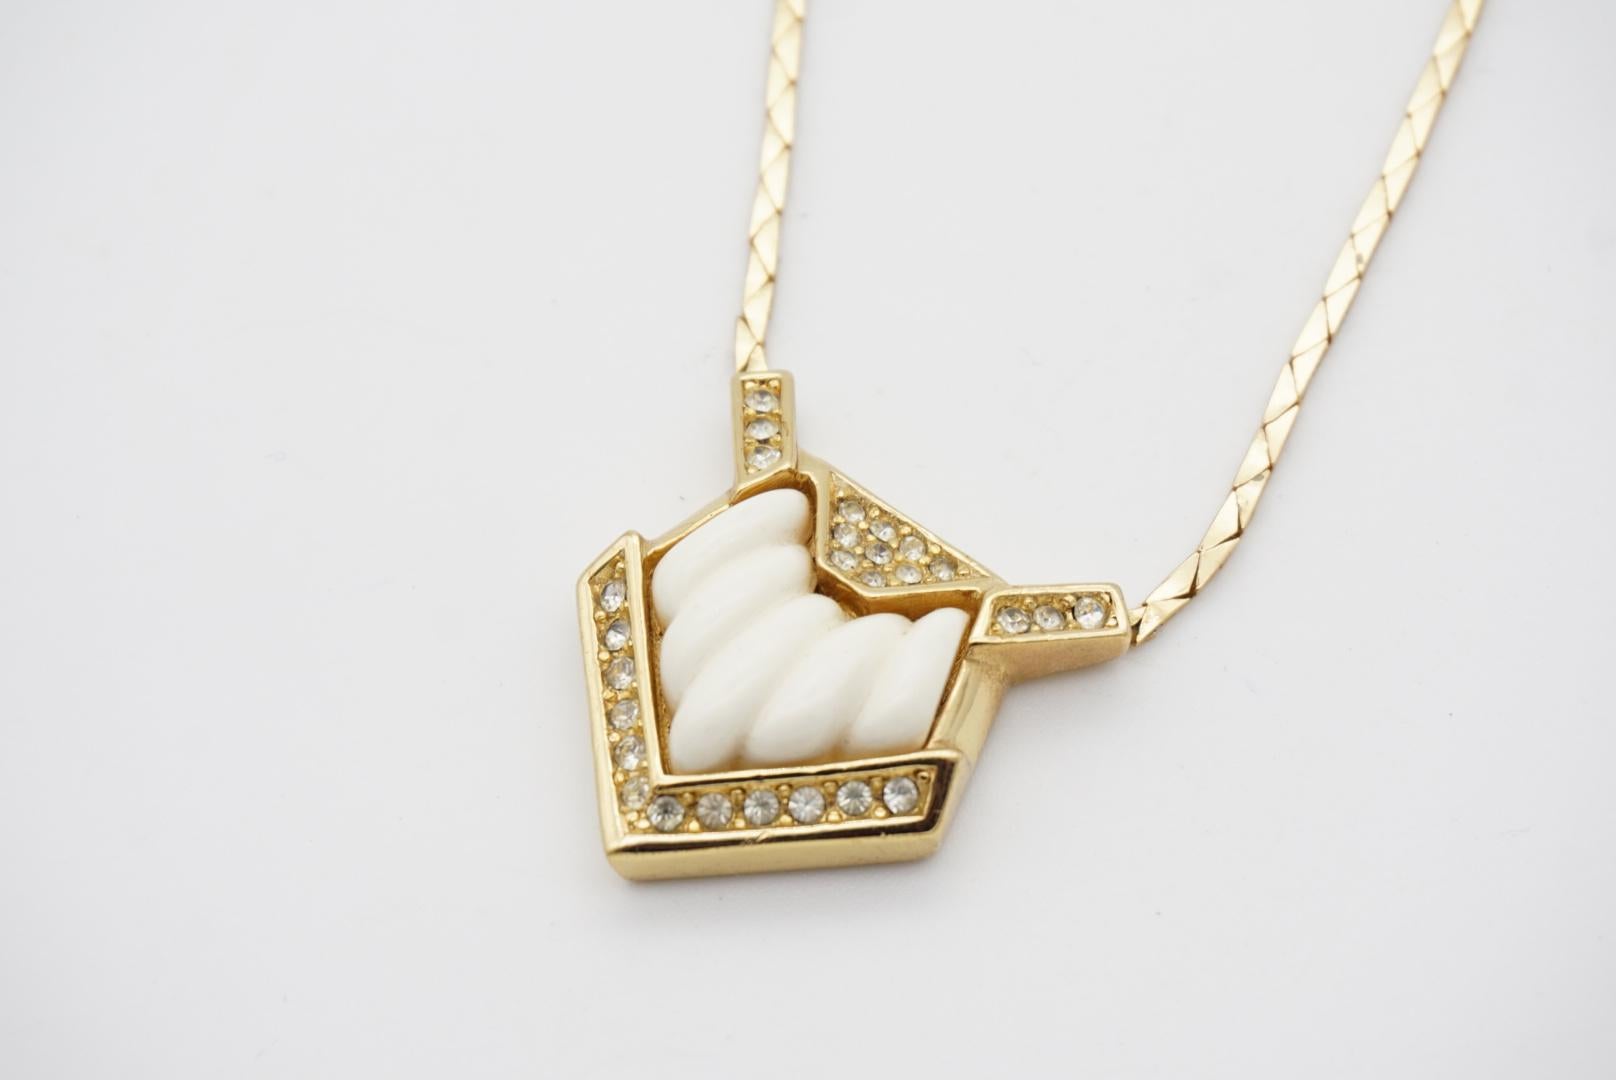 Christian Dior Vintage 1980s Triangle White Cream Crystal Gold Pendant Necklace For Sale 2